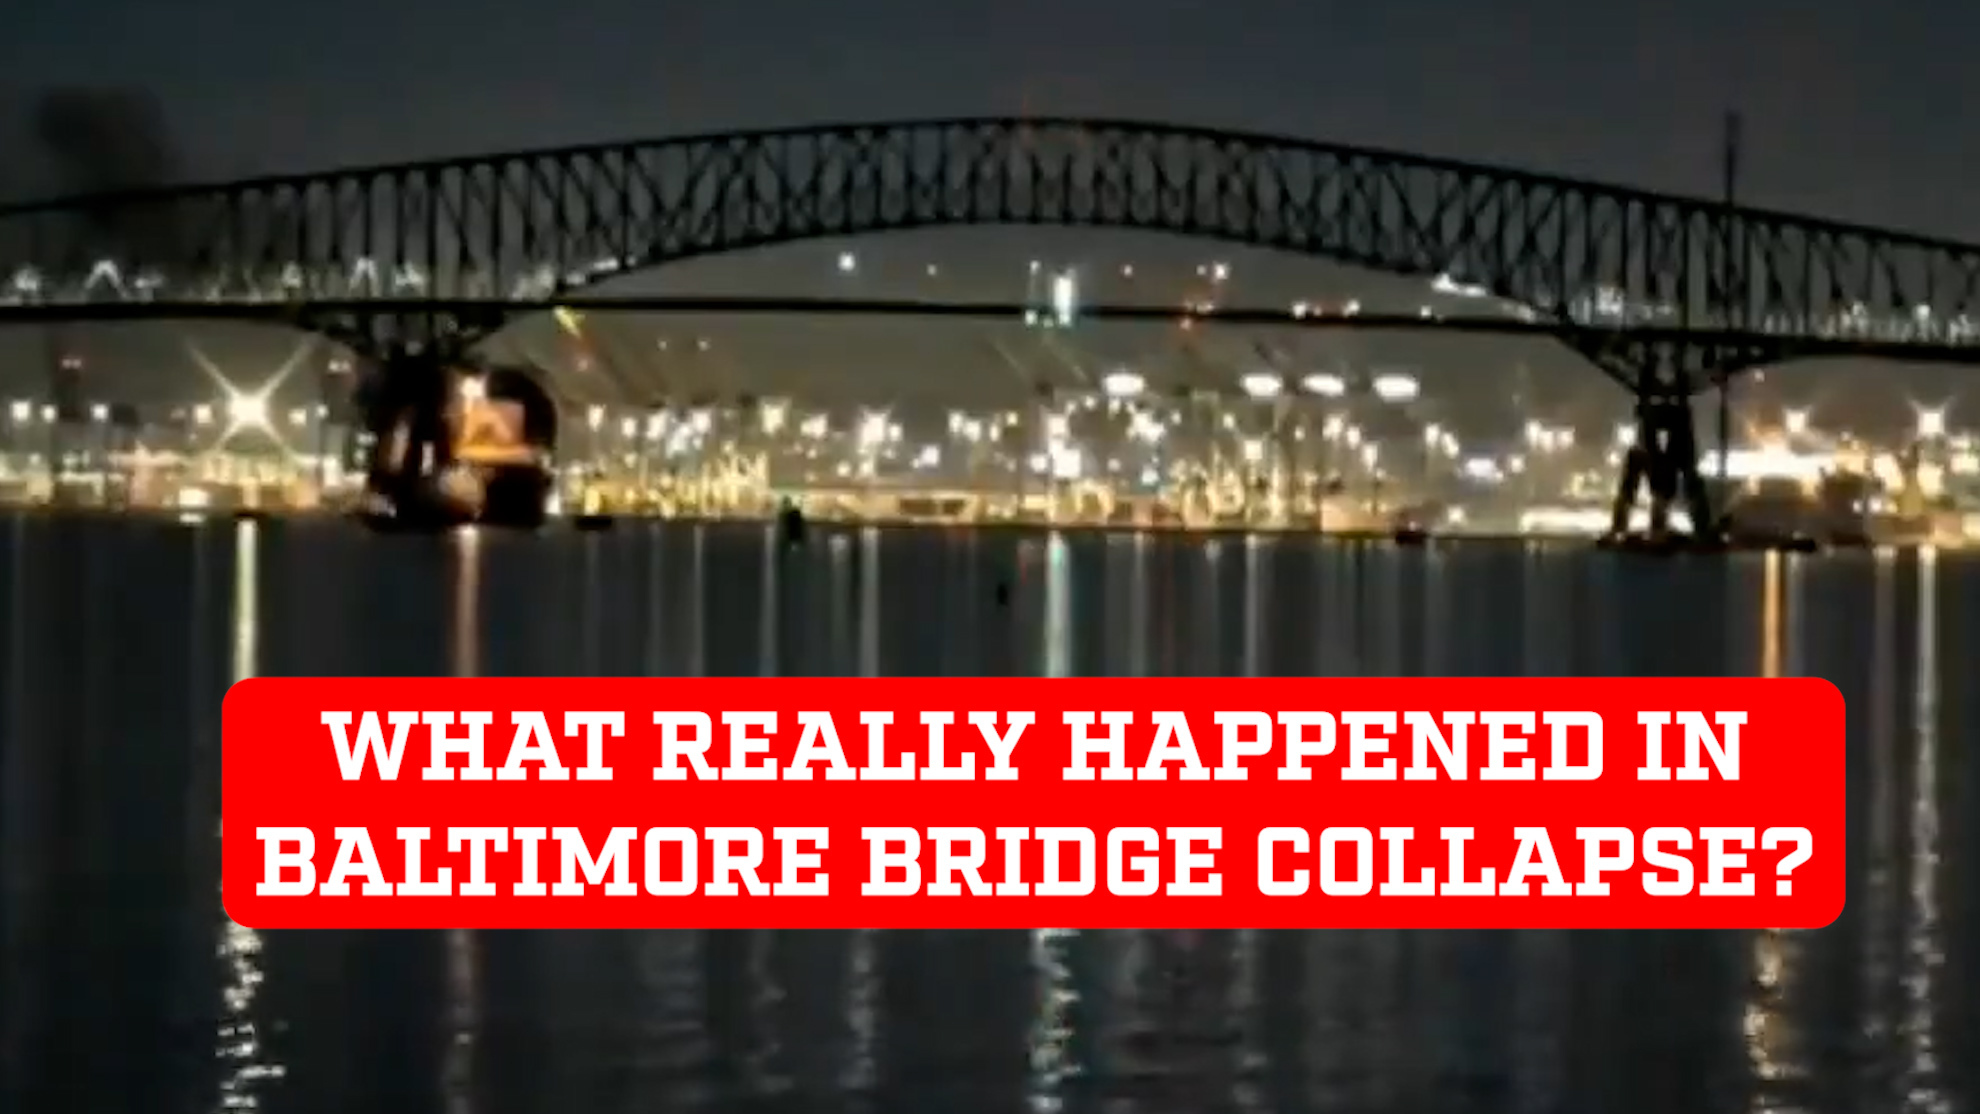 New video angle of the Baltimore Bridge collapse shows what really happend before the incident